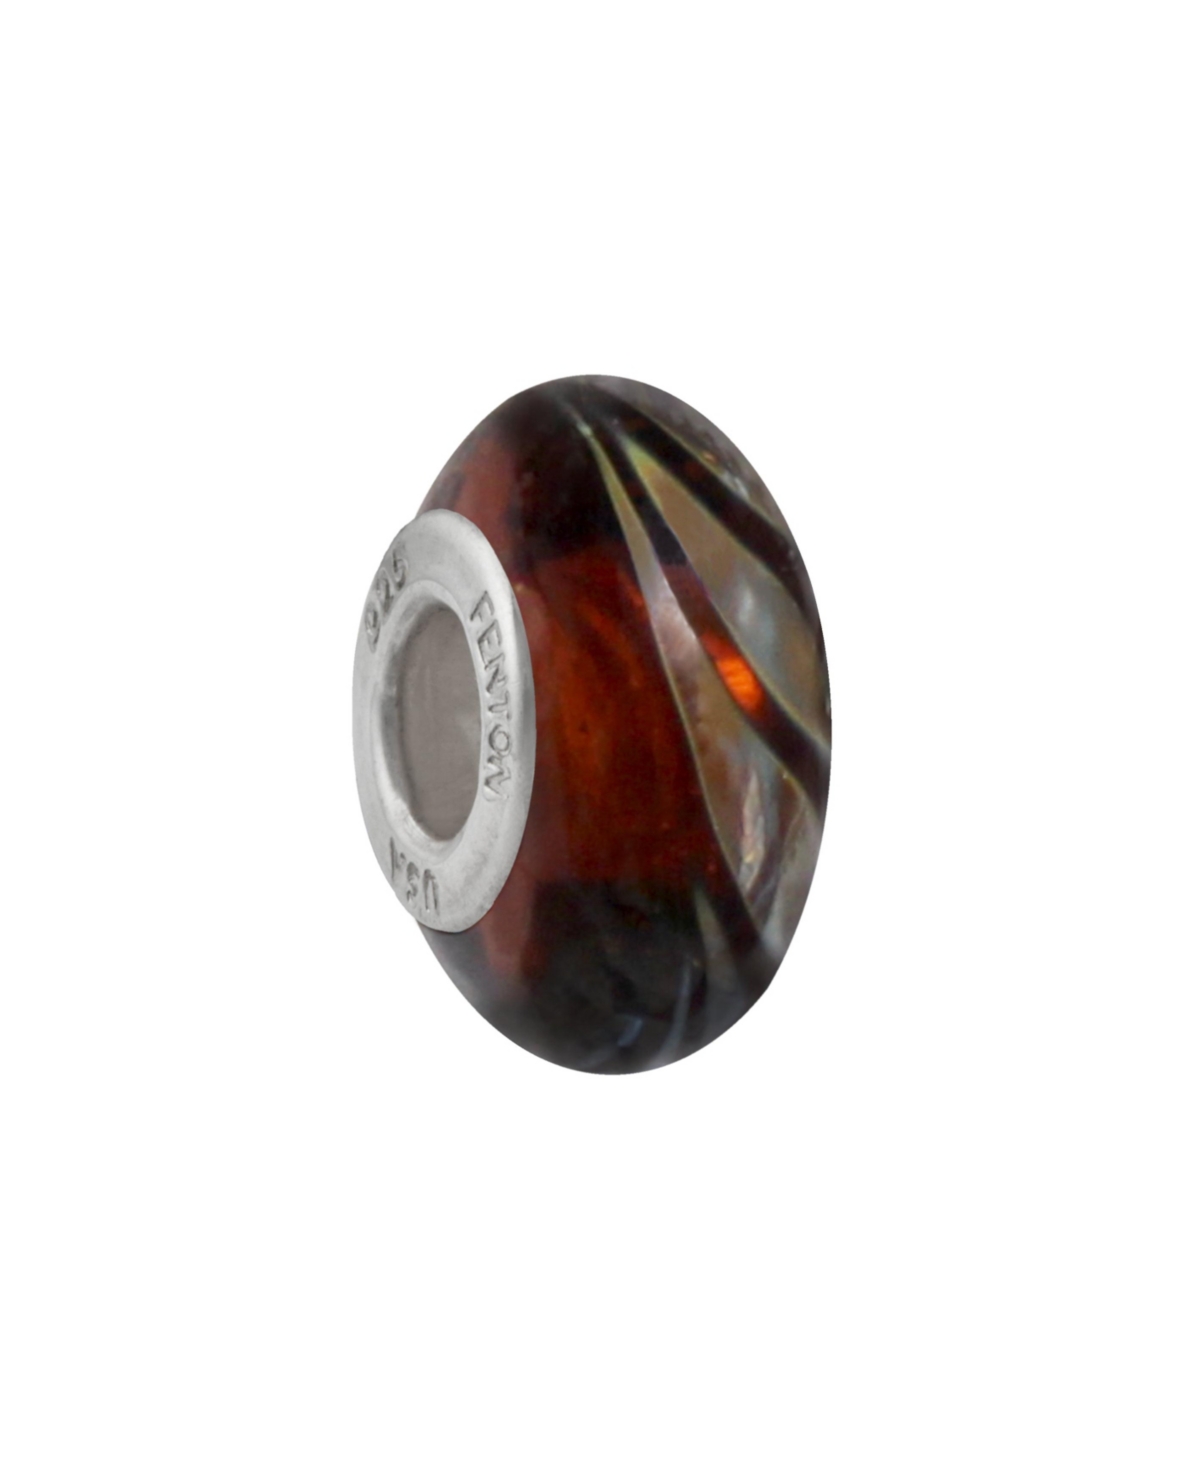 Glass Jewelry: Amber Plumes Glass Charm - Multi-color